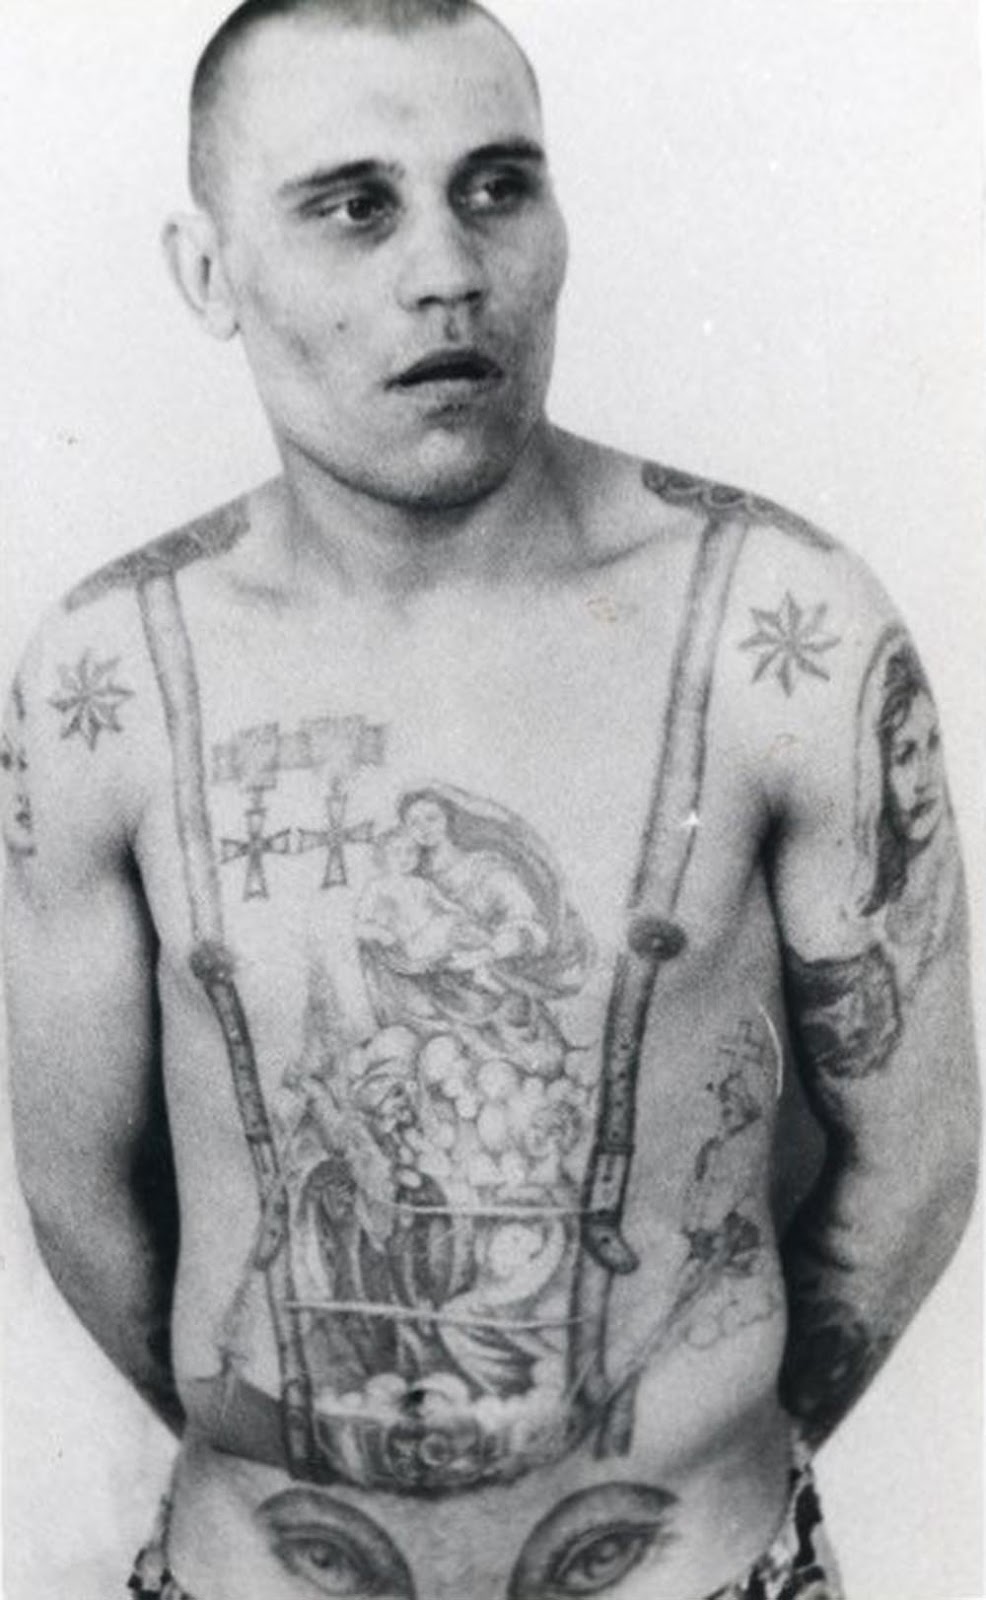 The stars on the shoulders show that this inmate is a criminal authority. The medals are awards that existed before the revolution and, as such, are signs of antagonism and defiance toward the Soviet regime. The eyes on the stomach denote a homosexual (the penis makes the 'nose' of the face).